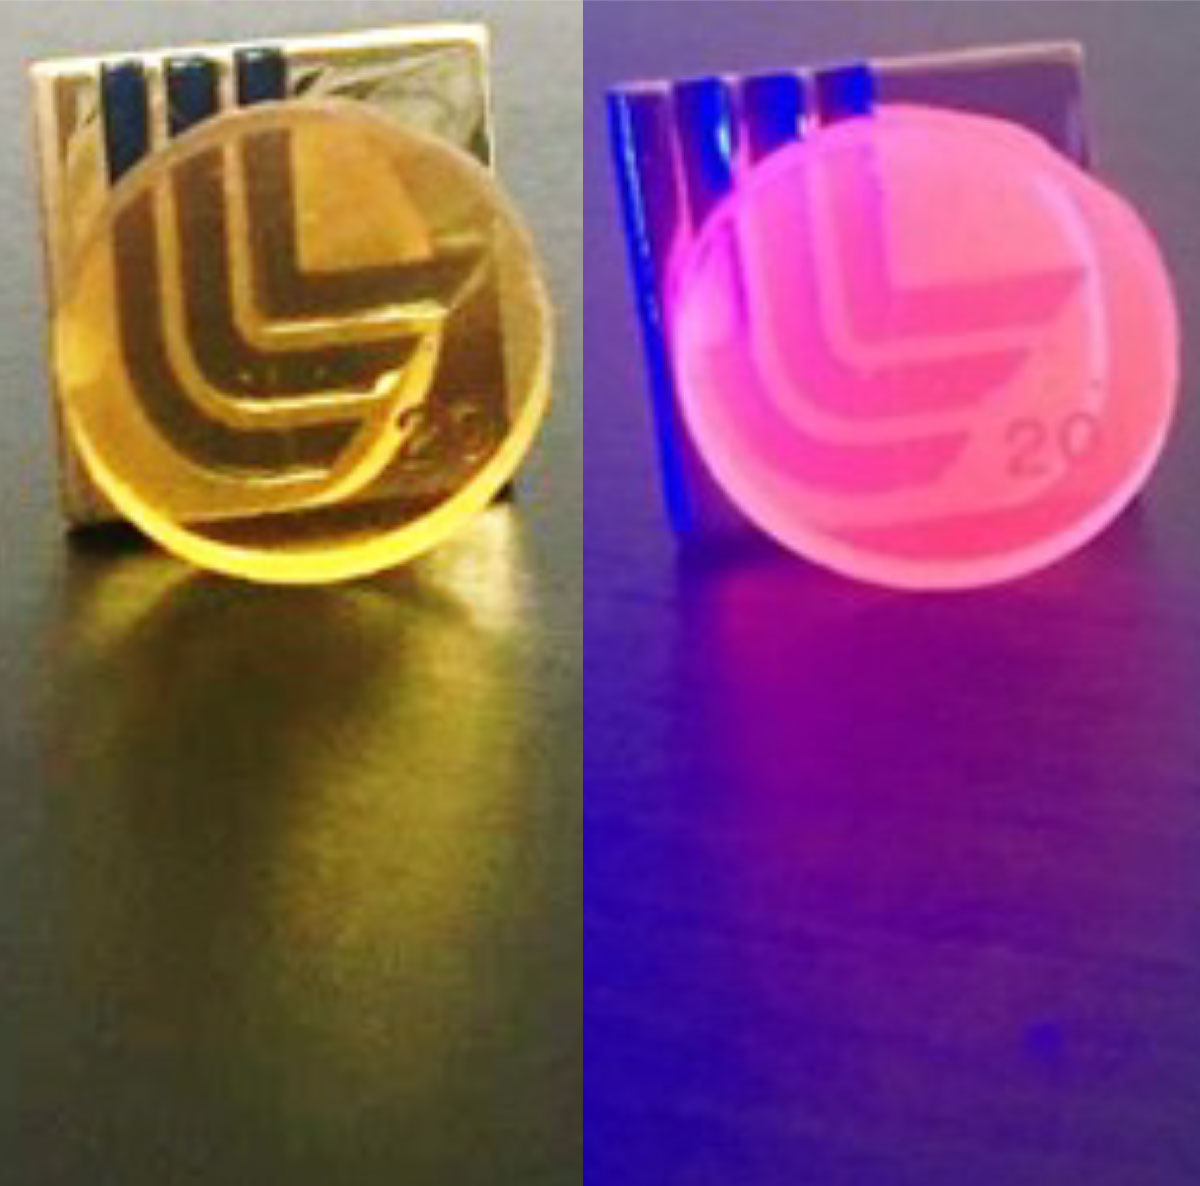 Two side-by-side images. The left photograph shows a small, reflective square featuring the LLNL logo that is partially obscured by a transparent yellow disc. The right photograph shows the same square object partially obscured by a transparent pink disc.